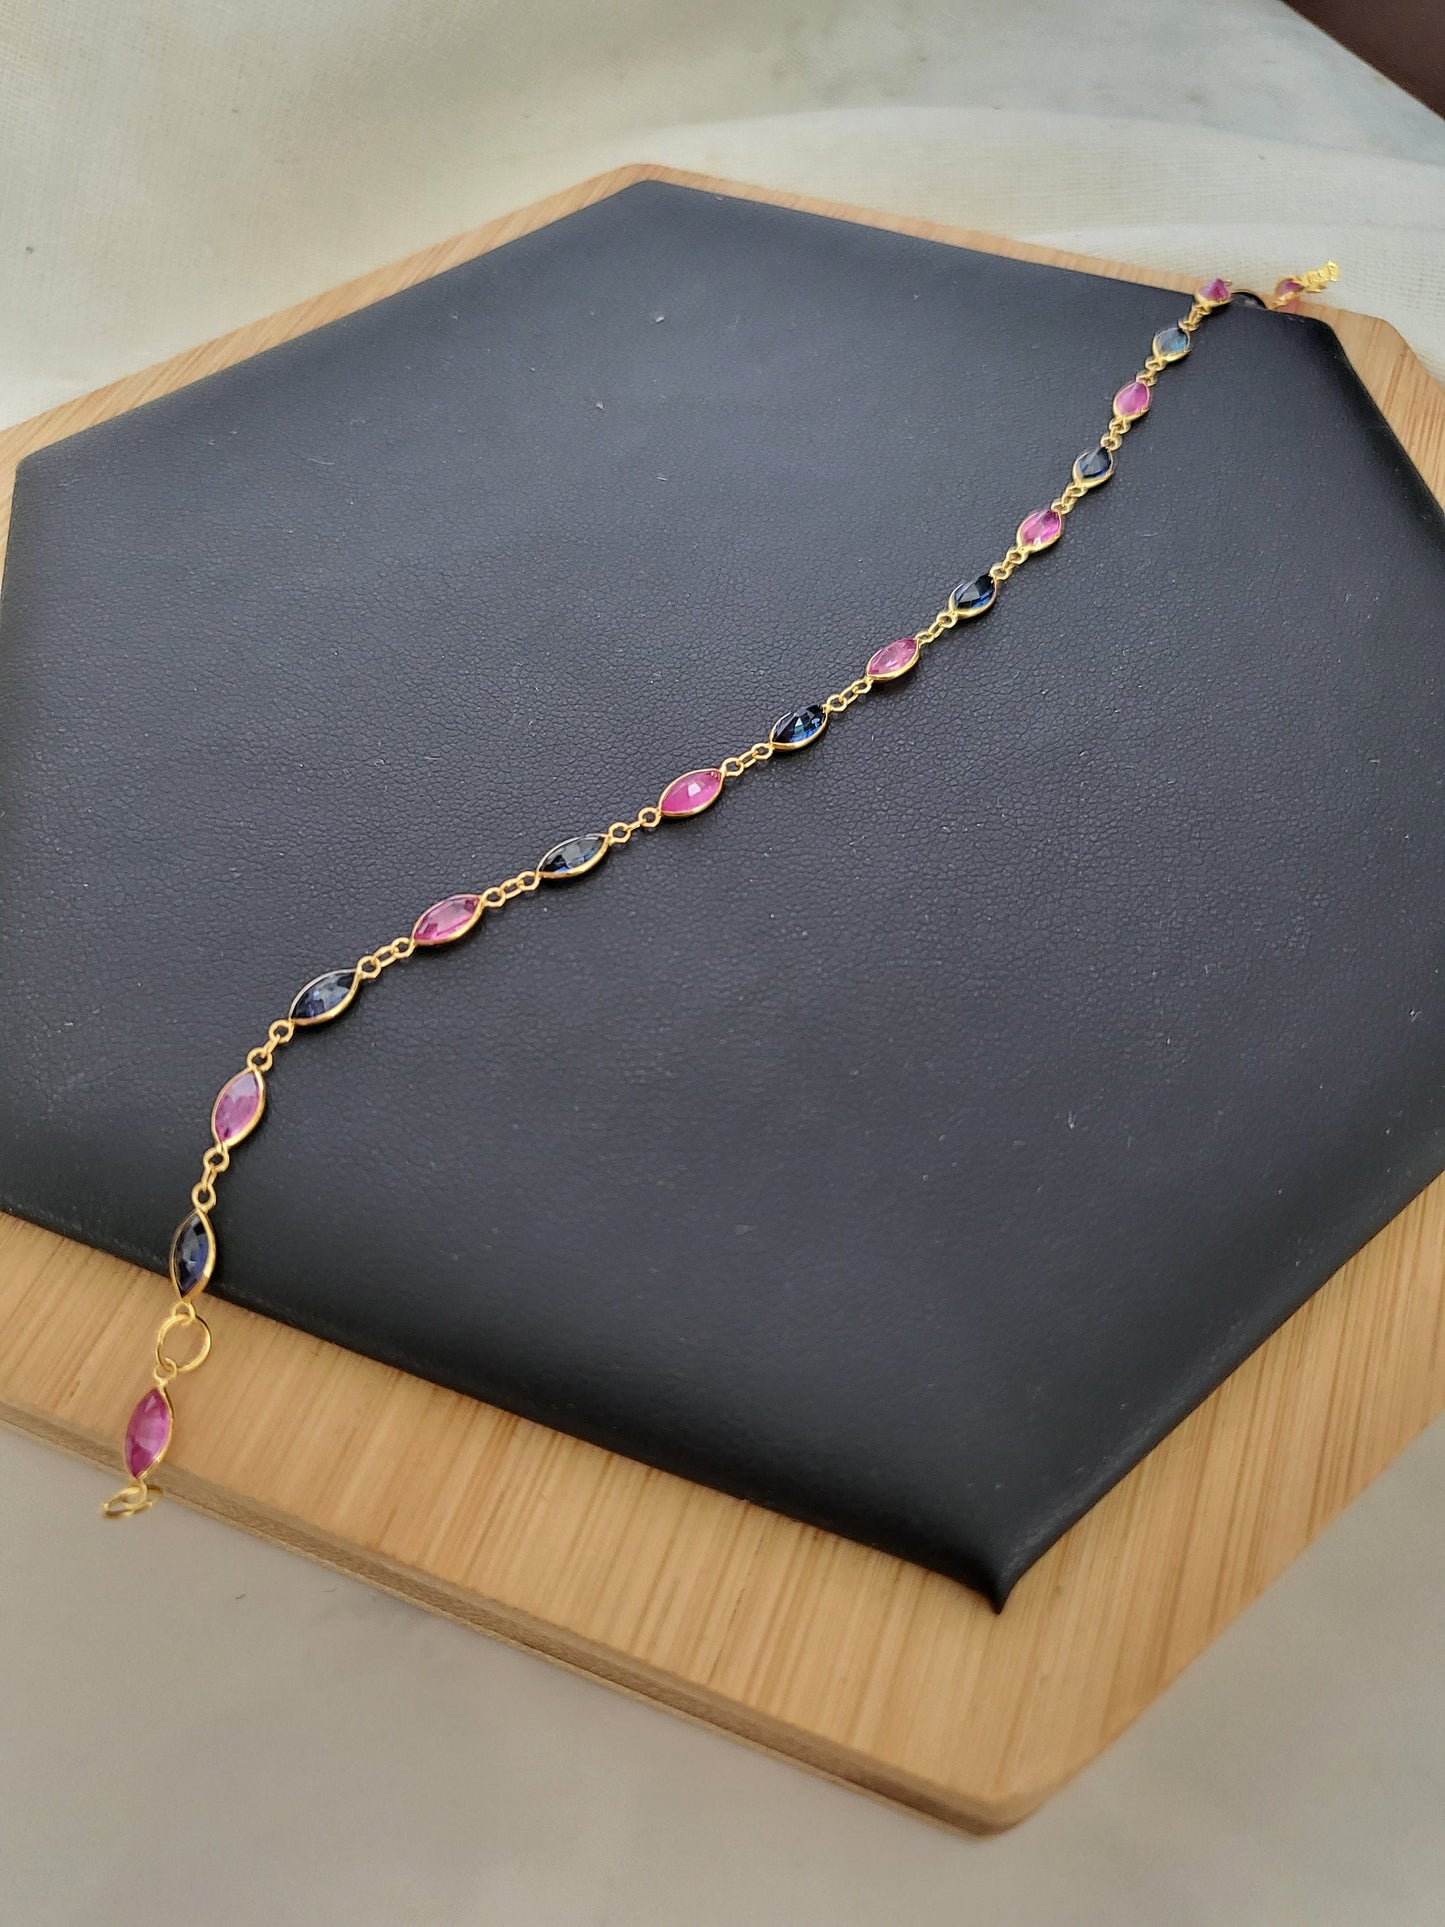 Thai Design Natural Pink Ruby Sapphire Blue 18K Solid Gold Link Chain Bracelet Rare Gemstone Dainty Transcluent Quality